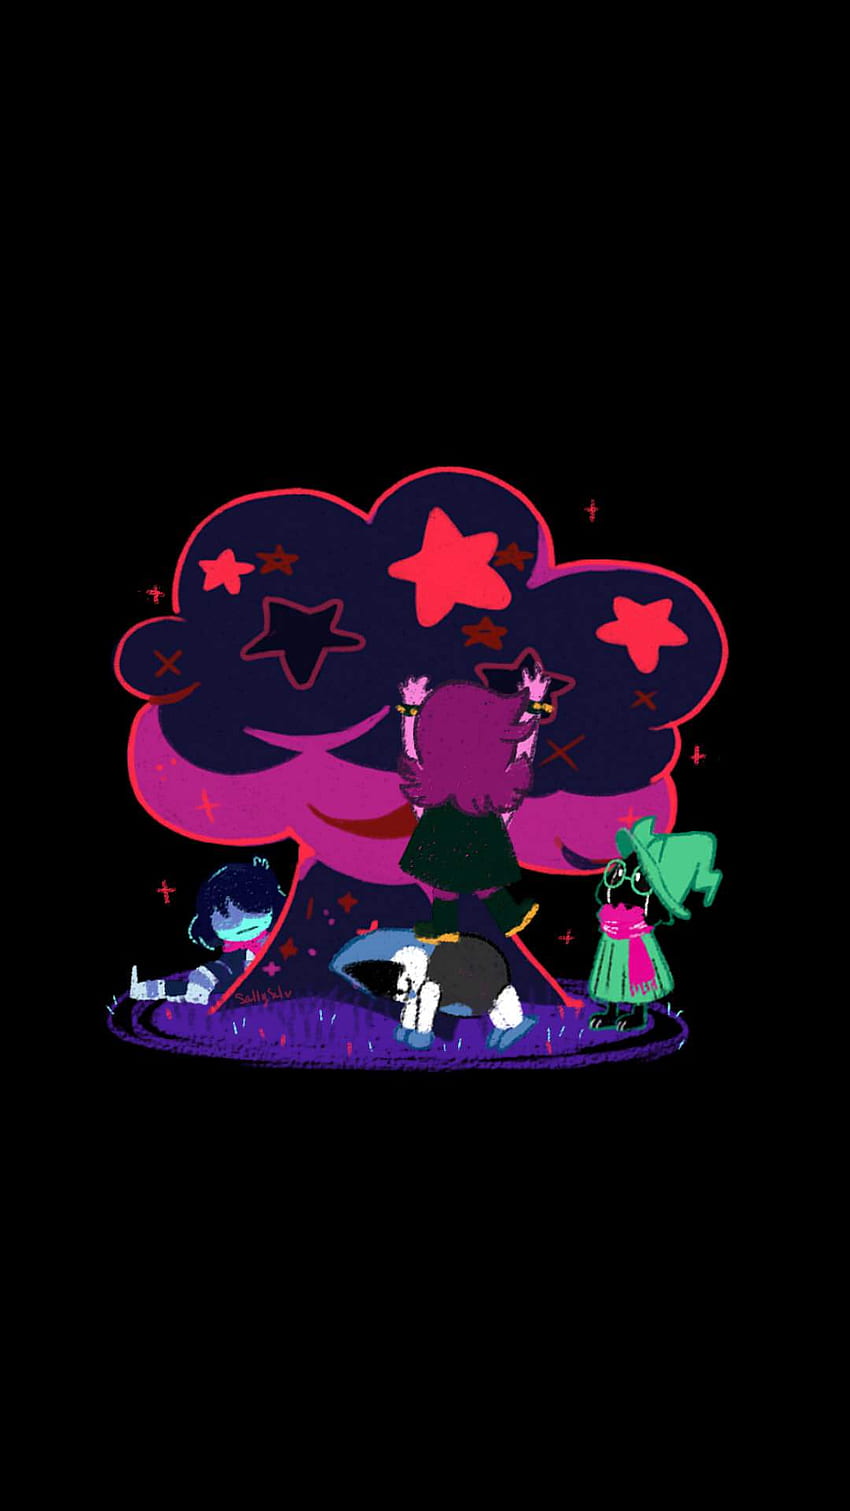 Toby Fox Gives an Update on Deltarune, in Honor of Undertale's Anniversary  | VG247